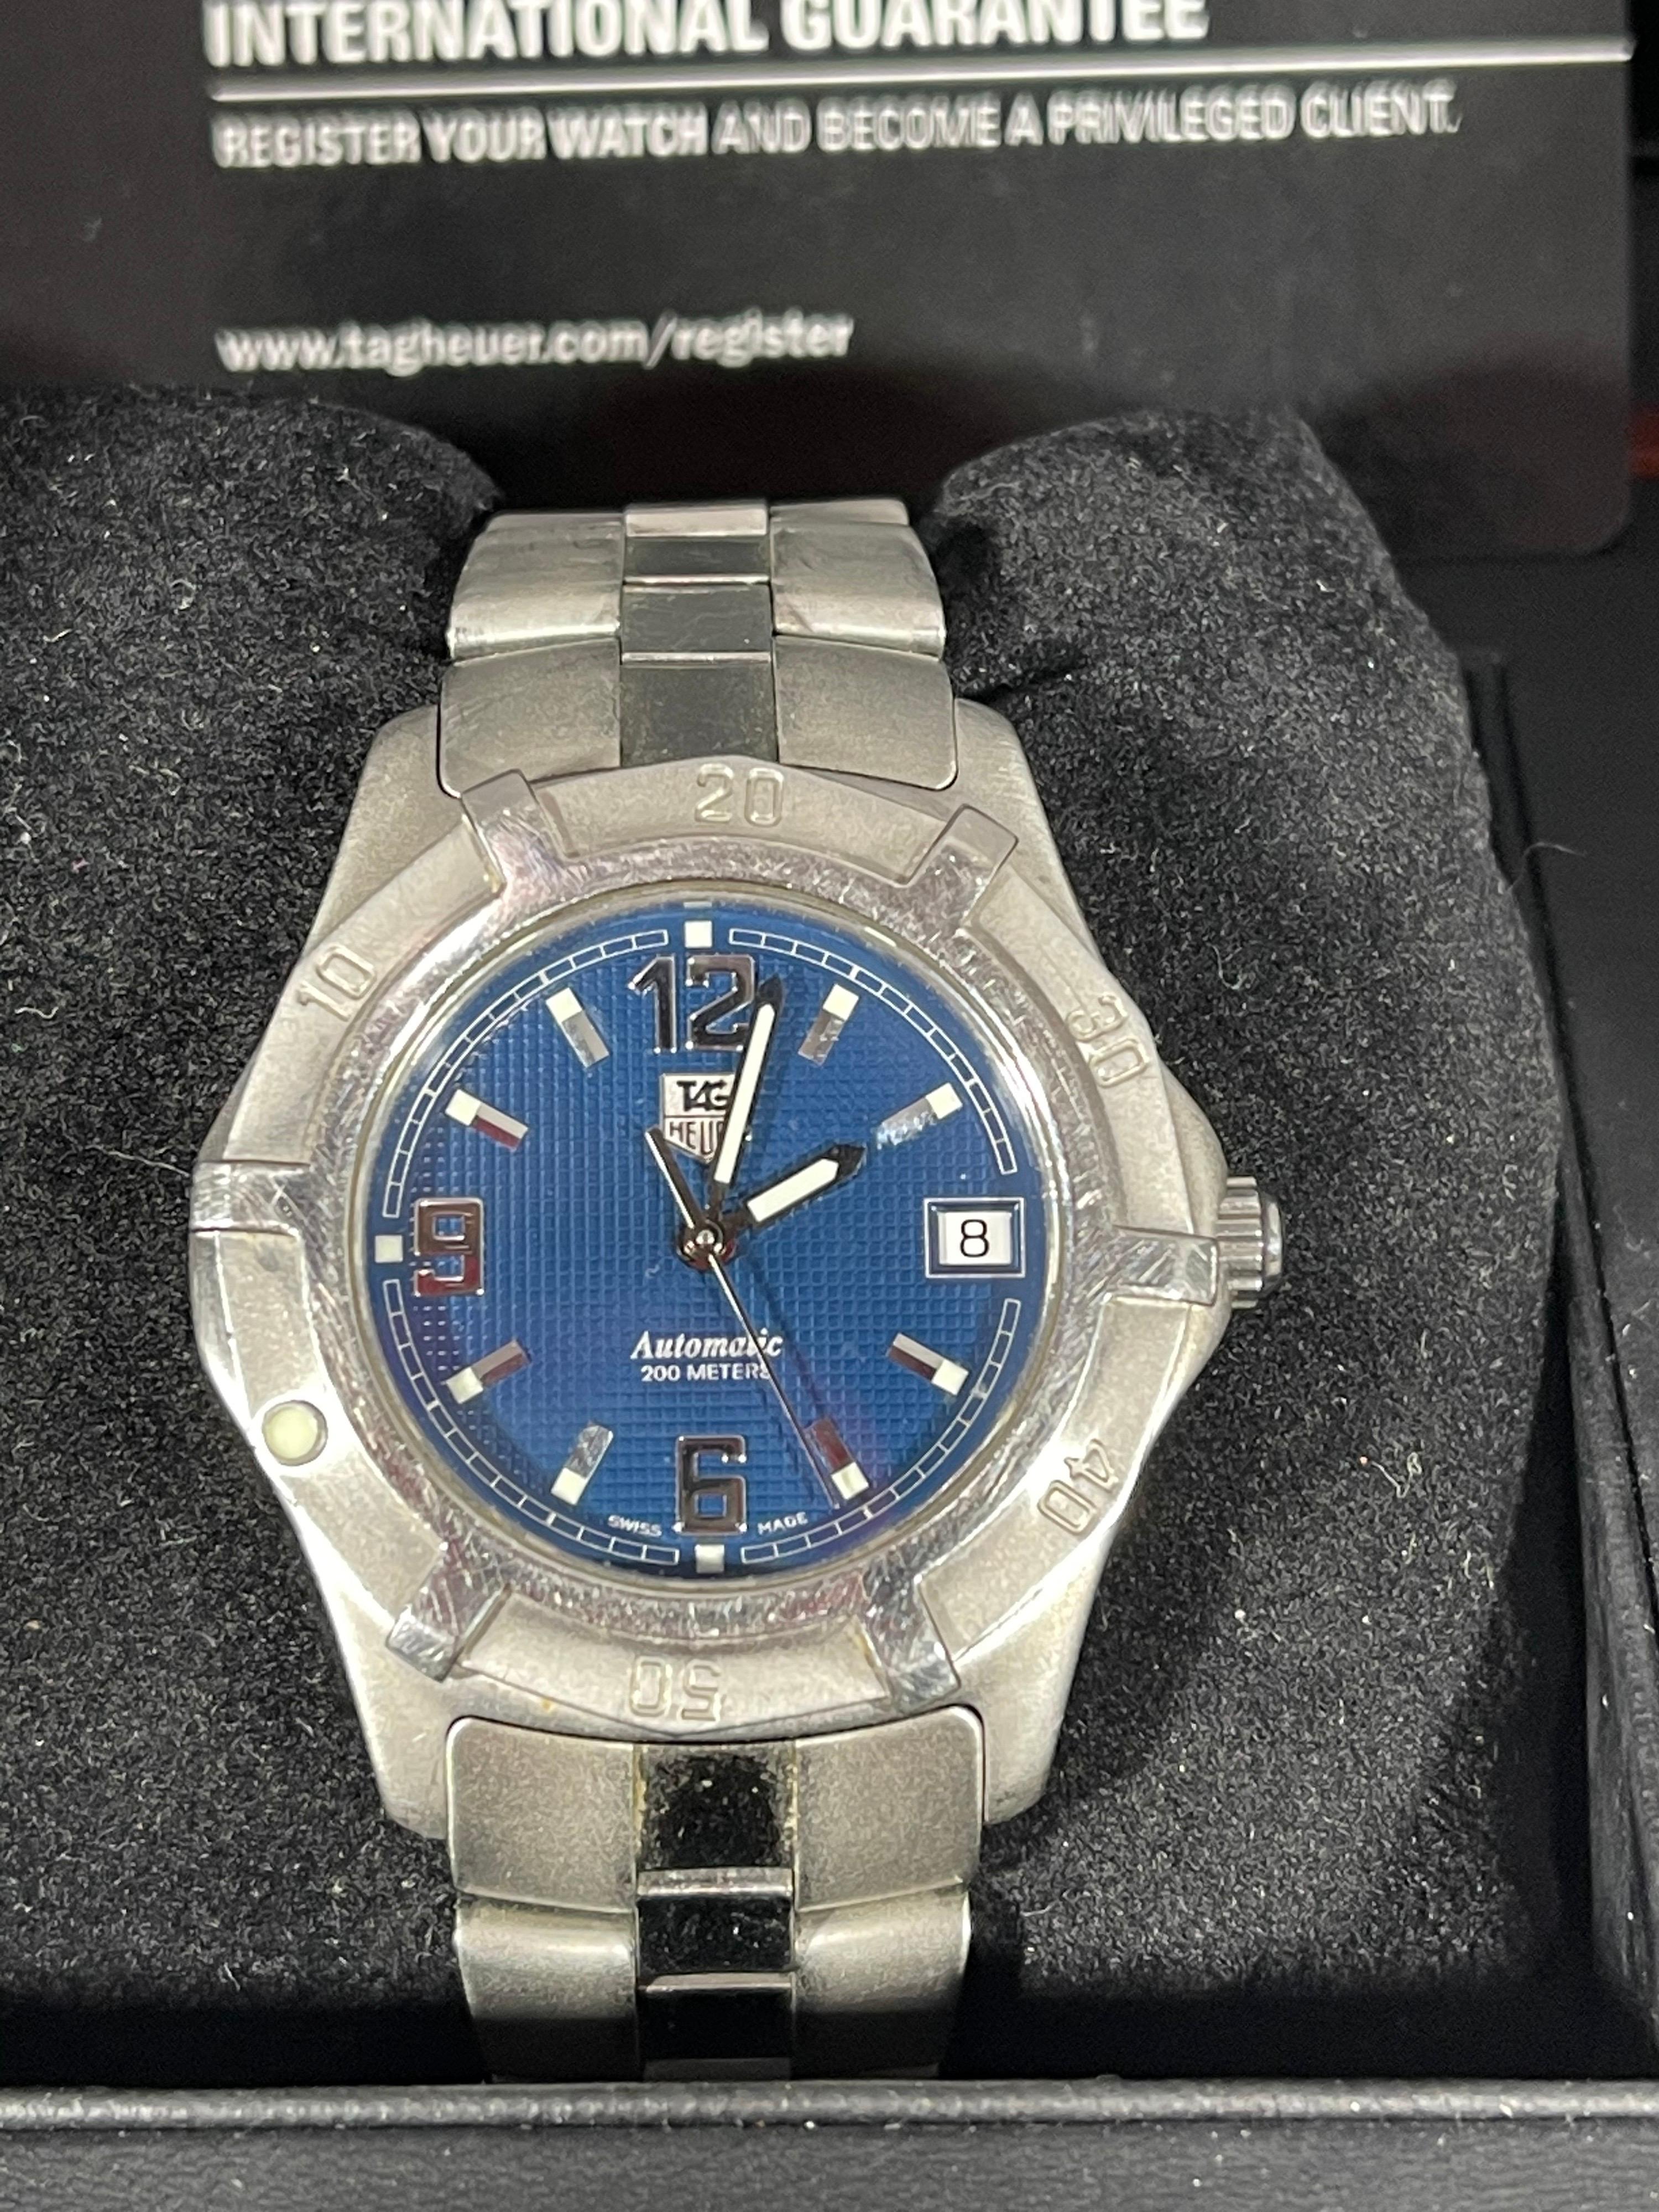 
Tag Heuer WN2112  Automatic Stainless Steel Watch Professional 200M with Date and comes with a box
 Blue dial
 Pre-Owned
 Case Diameter: 38mm
Wrist Size: 6.3